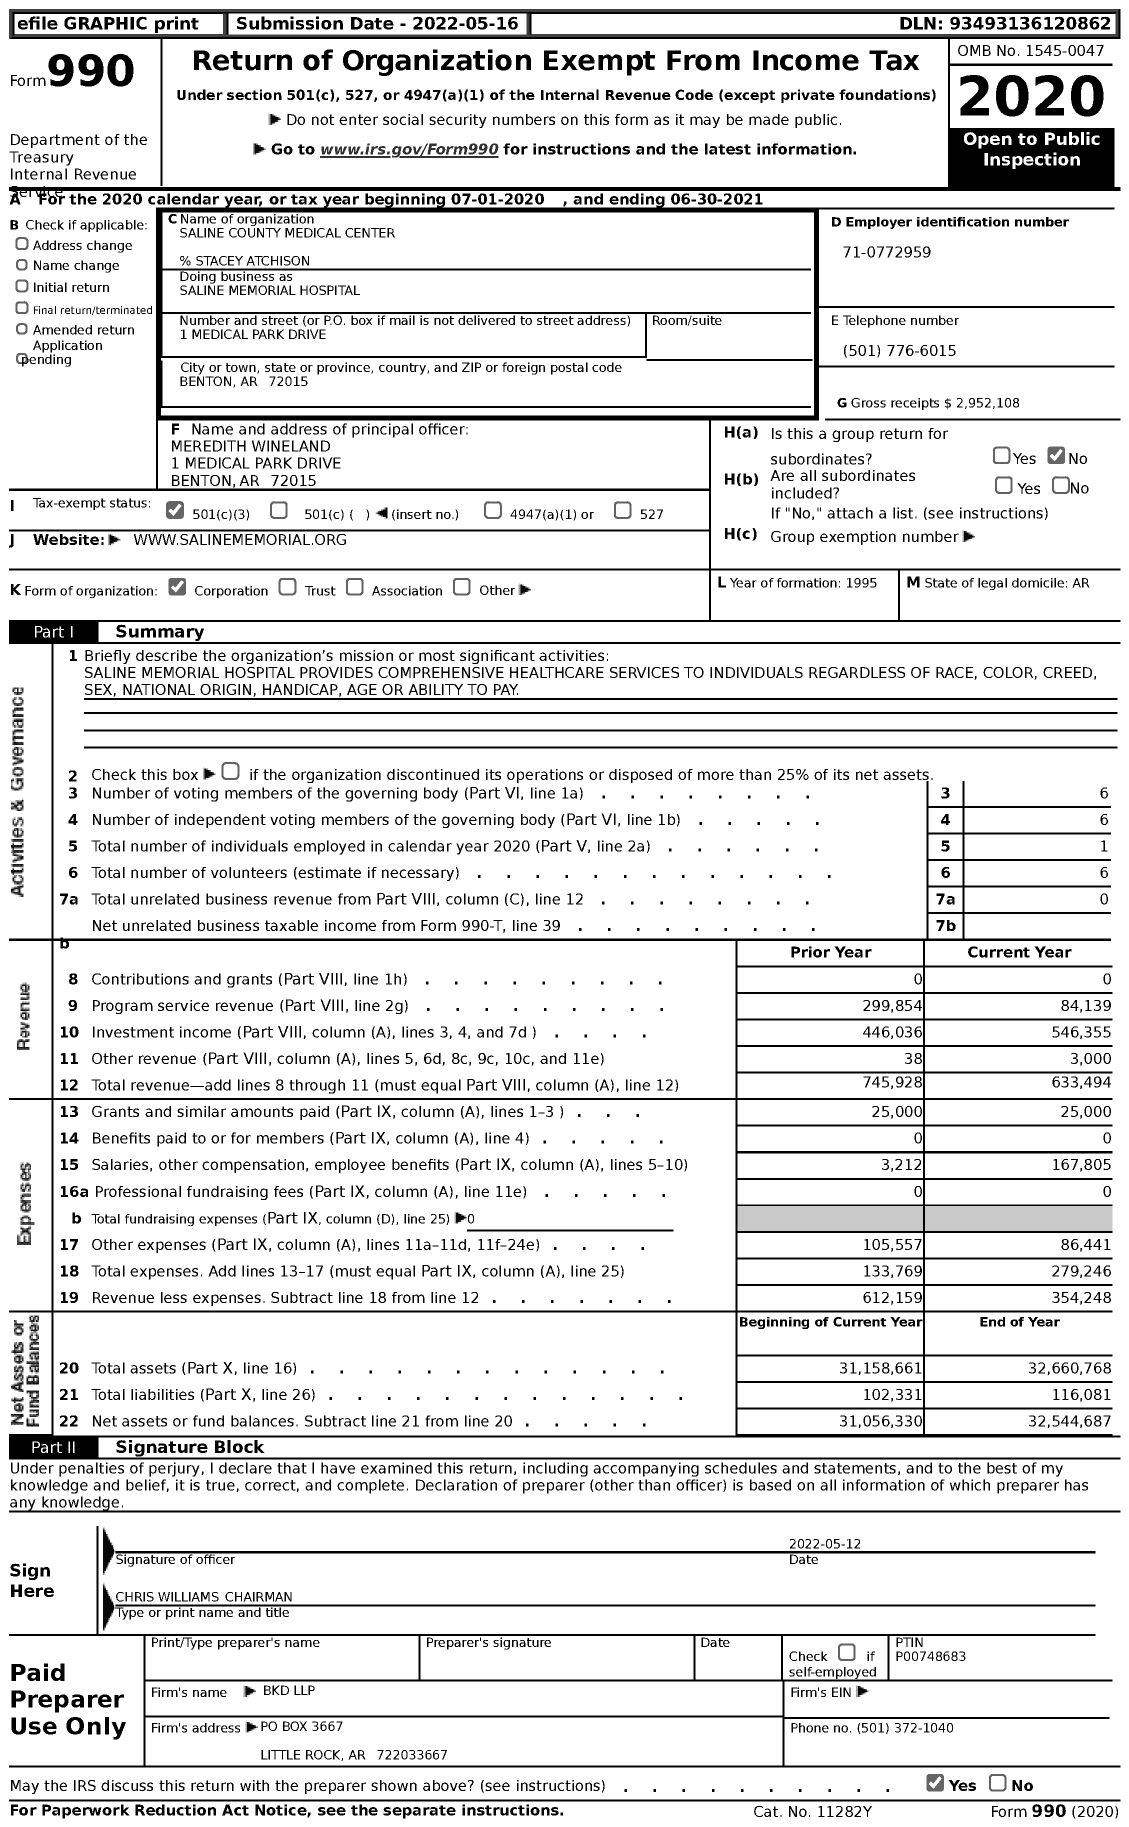 Image of first page of 2020 Form 990 for Saline Memorial Hospital (SMH)